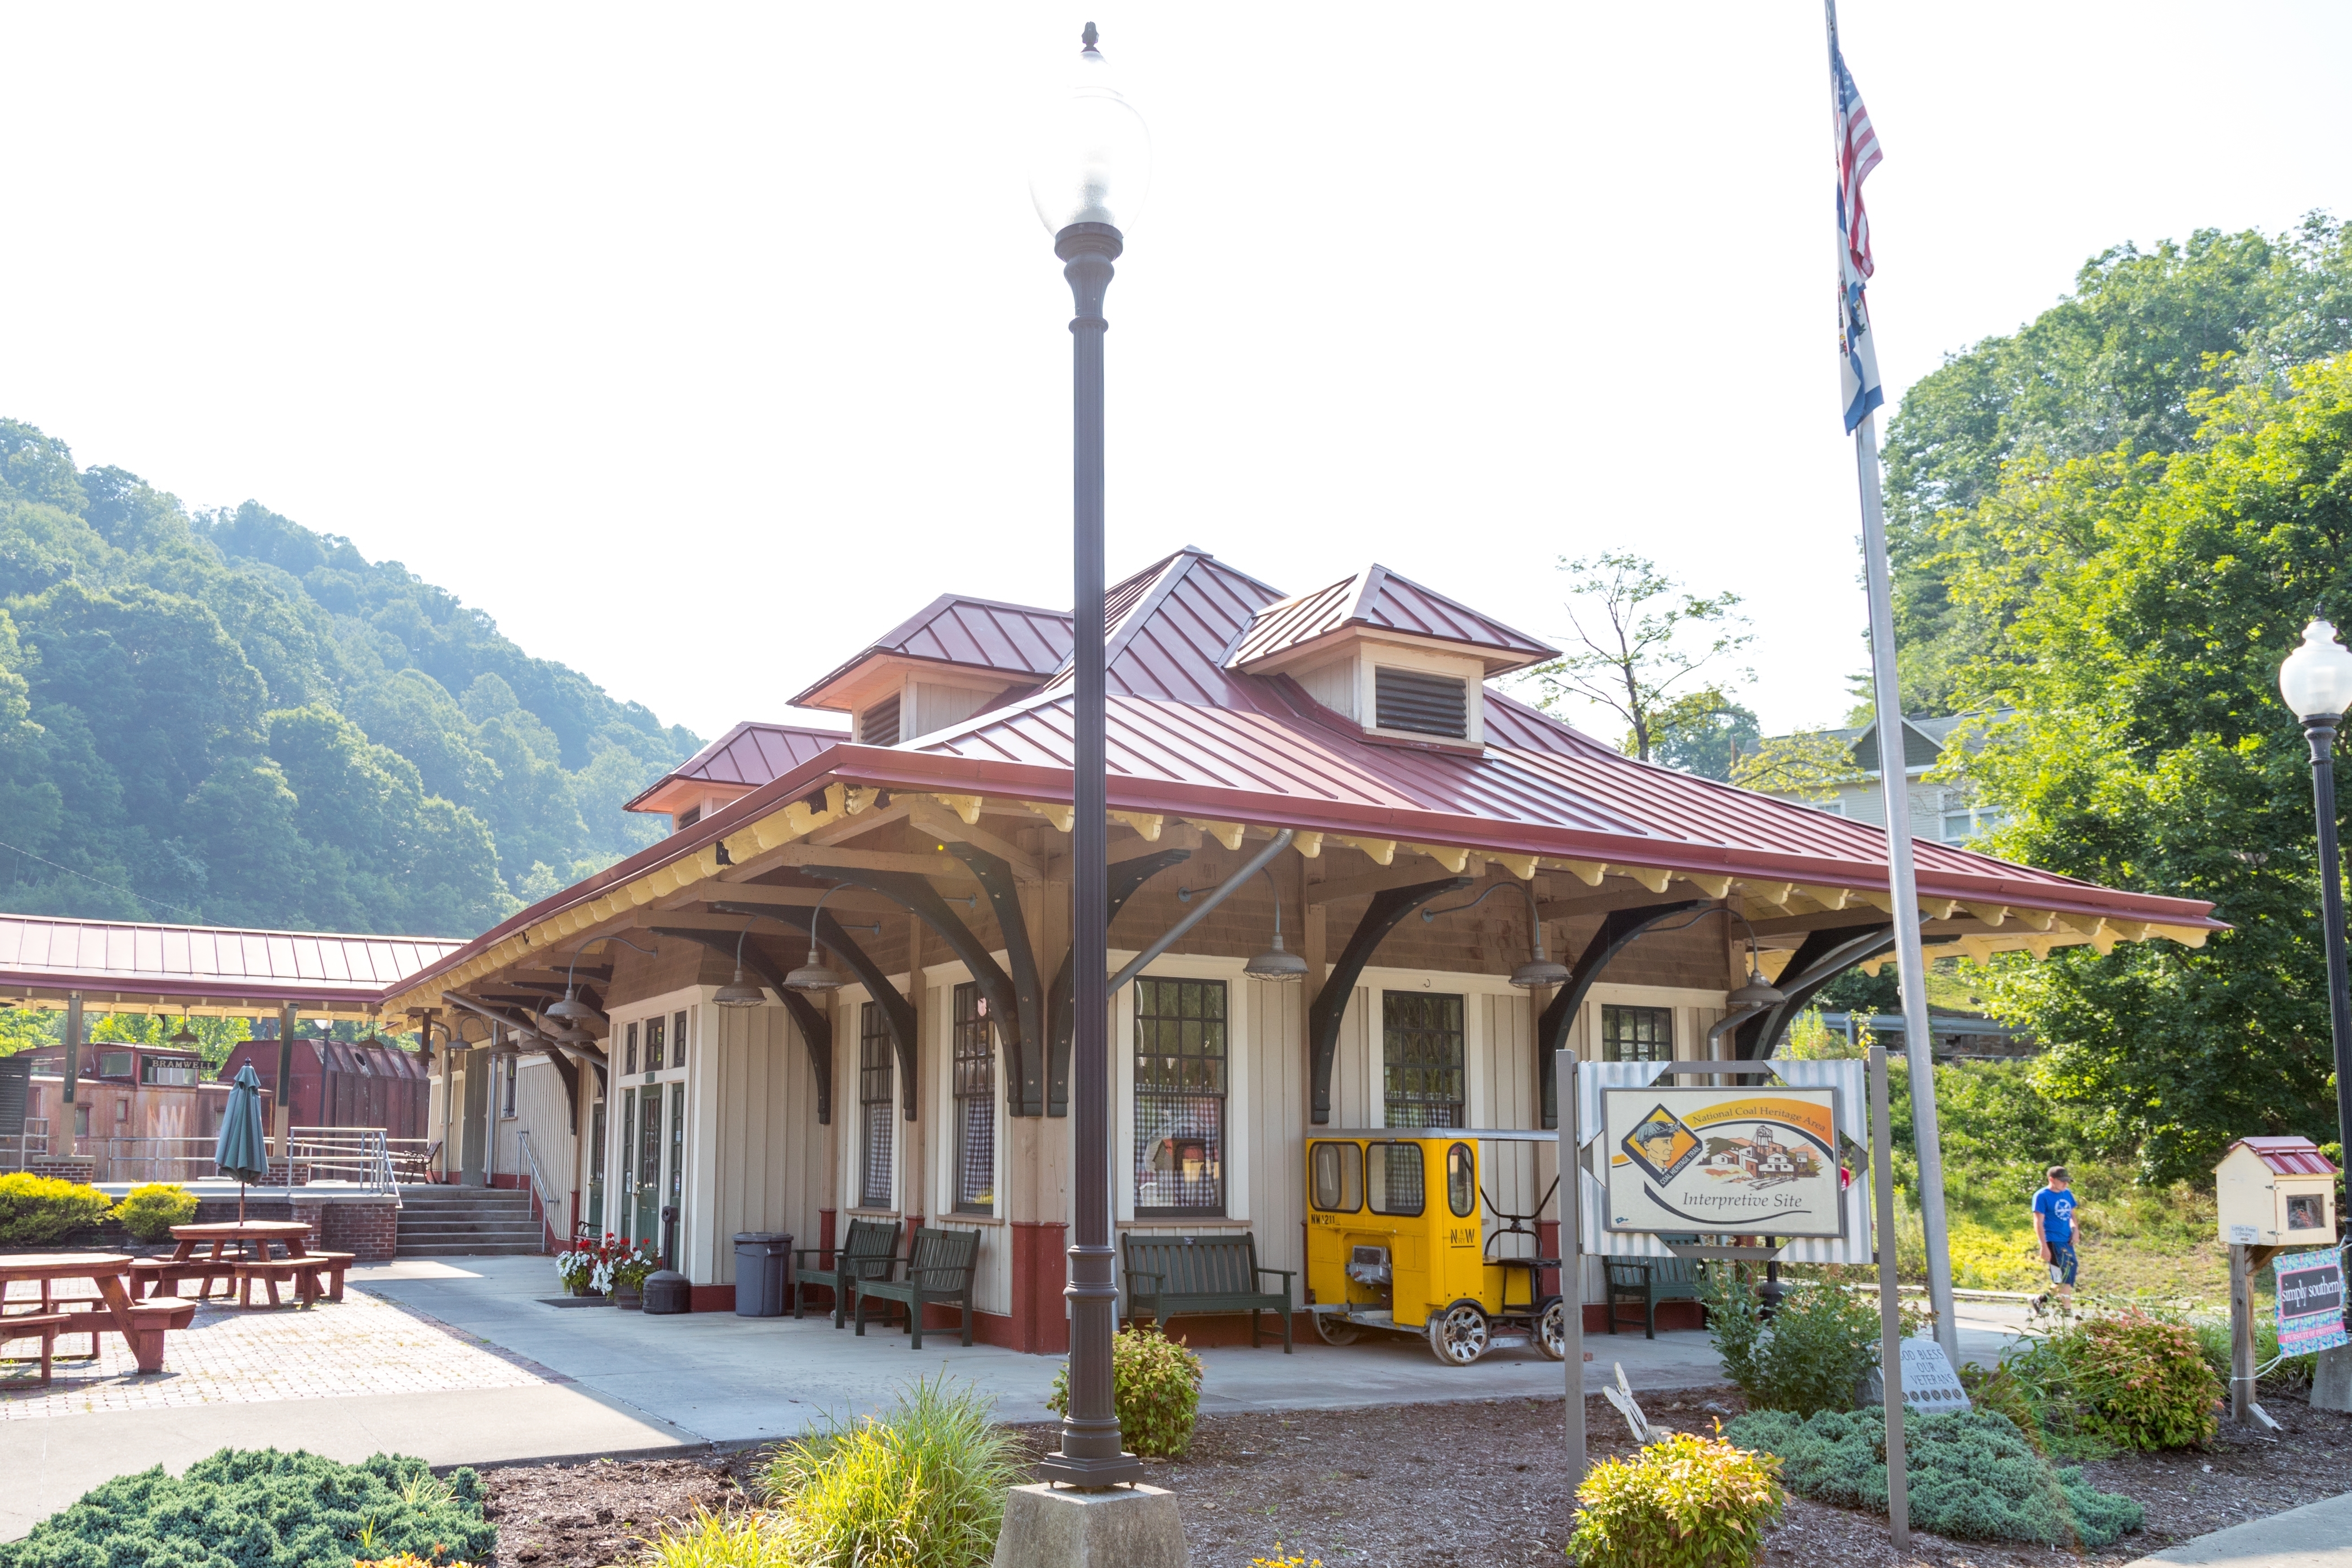 Replica of the N&W Station in Bramwell, West Virginia